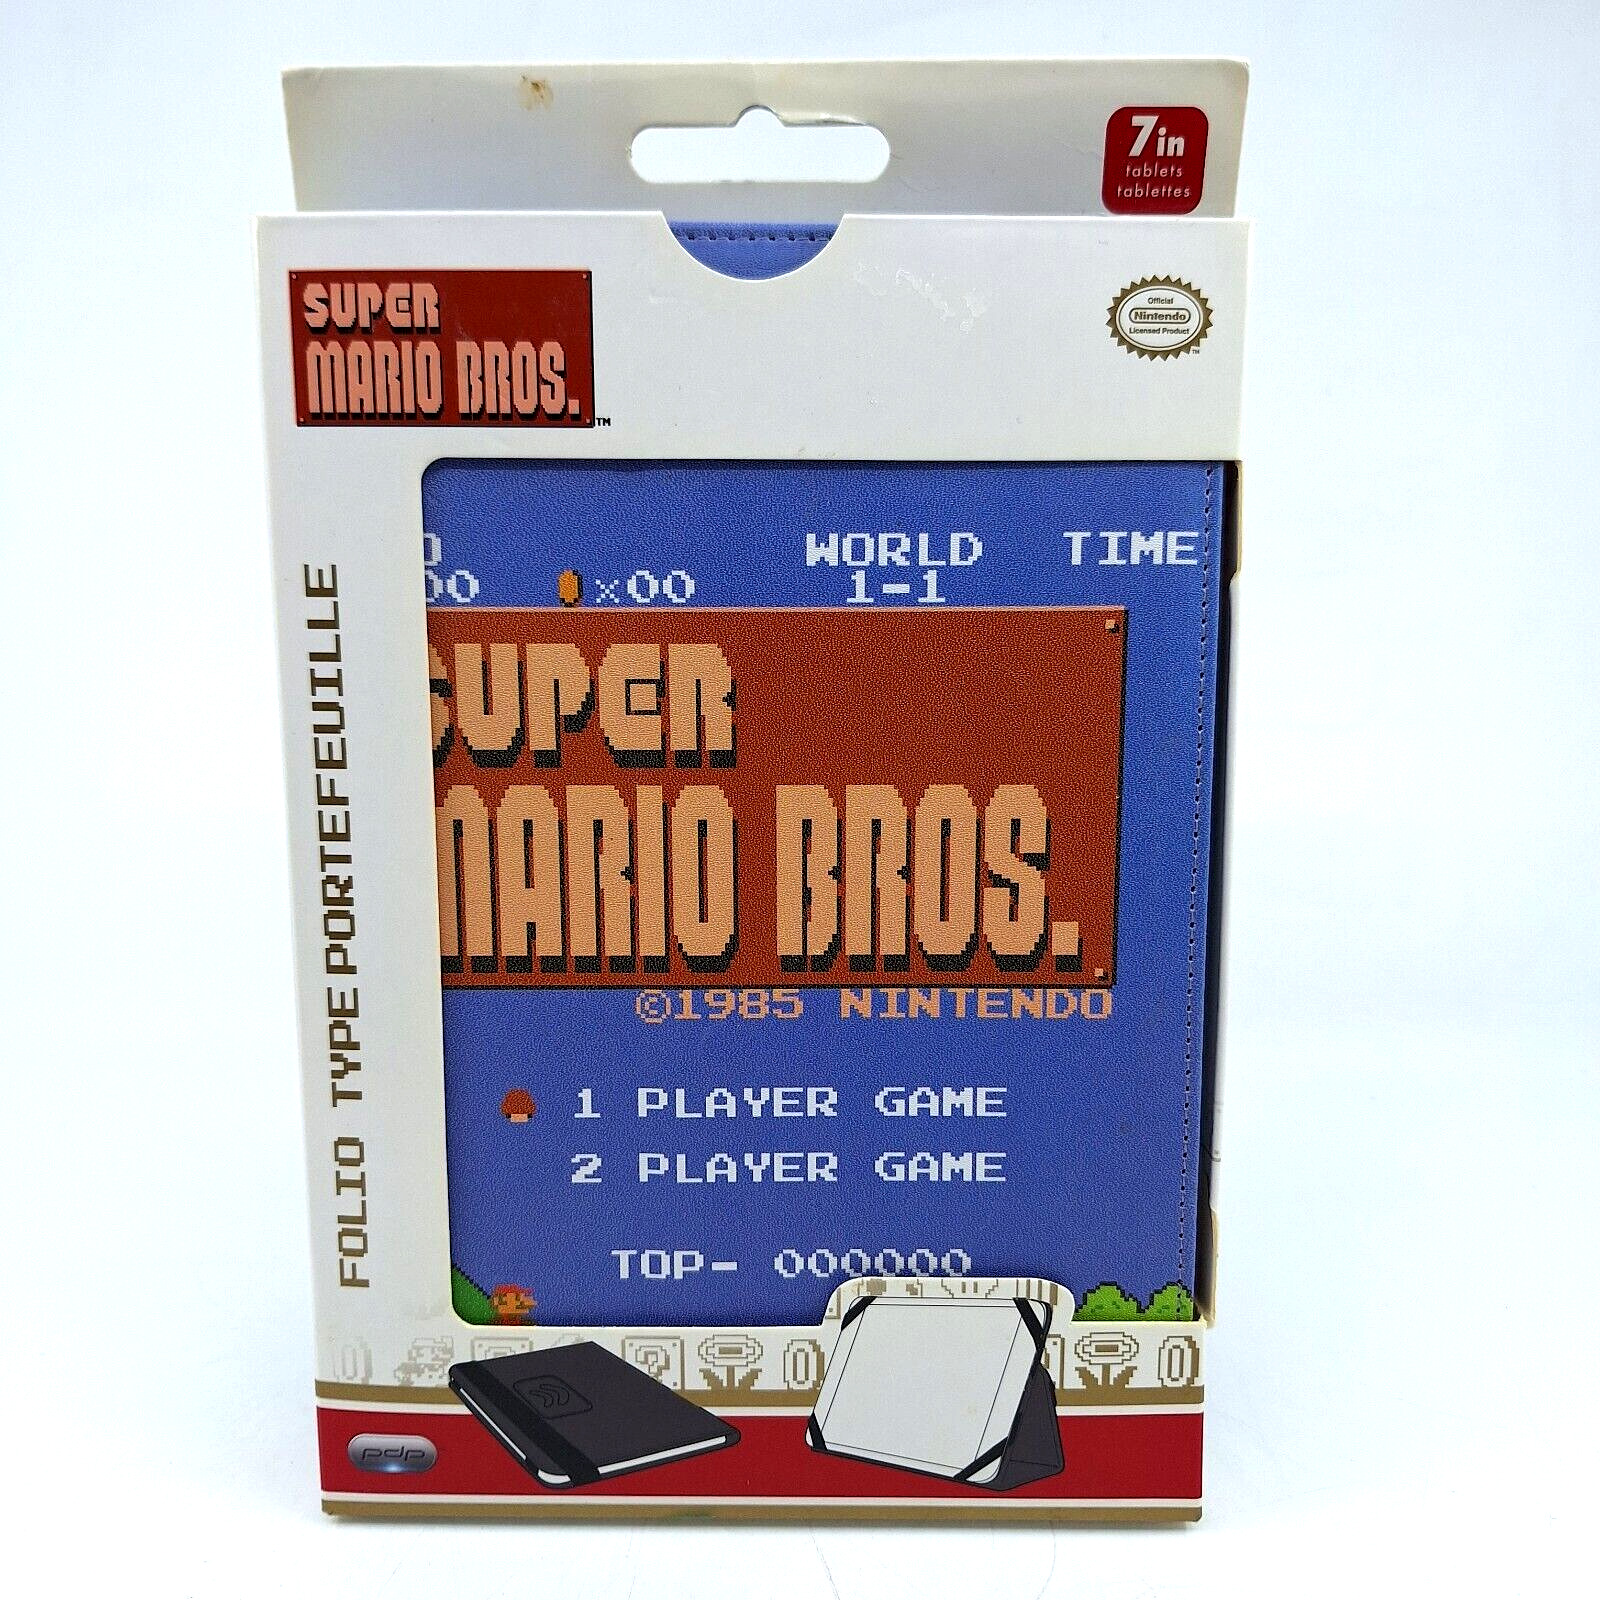 Folio Case Stand Cover for 7” Tablet, Super Mario Bros., Universal